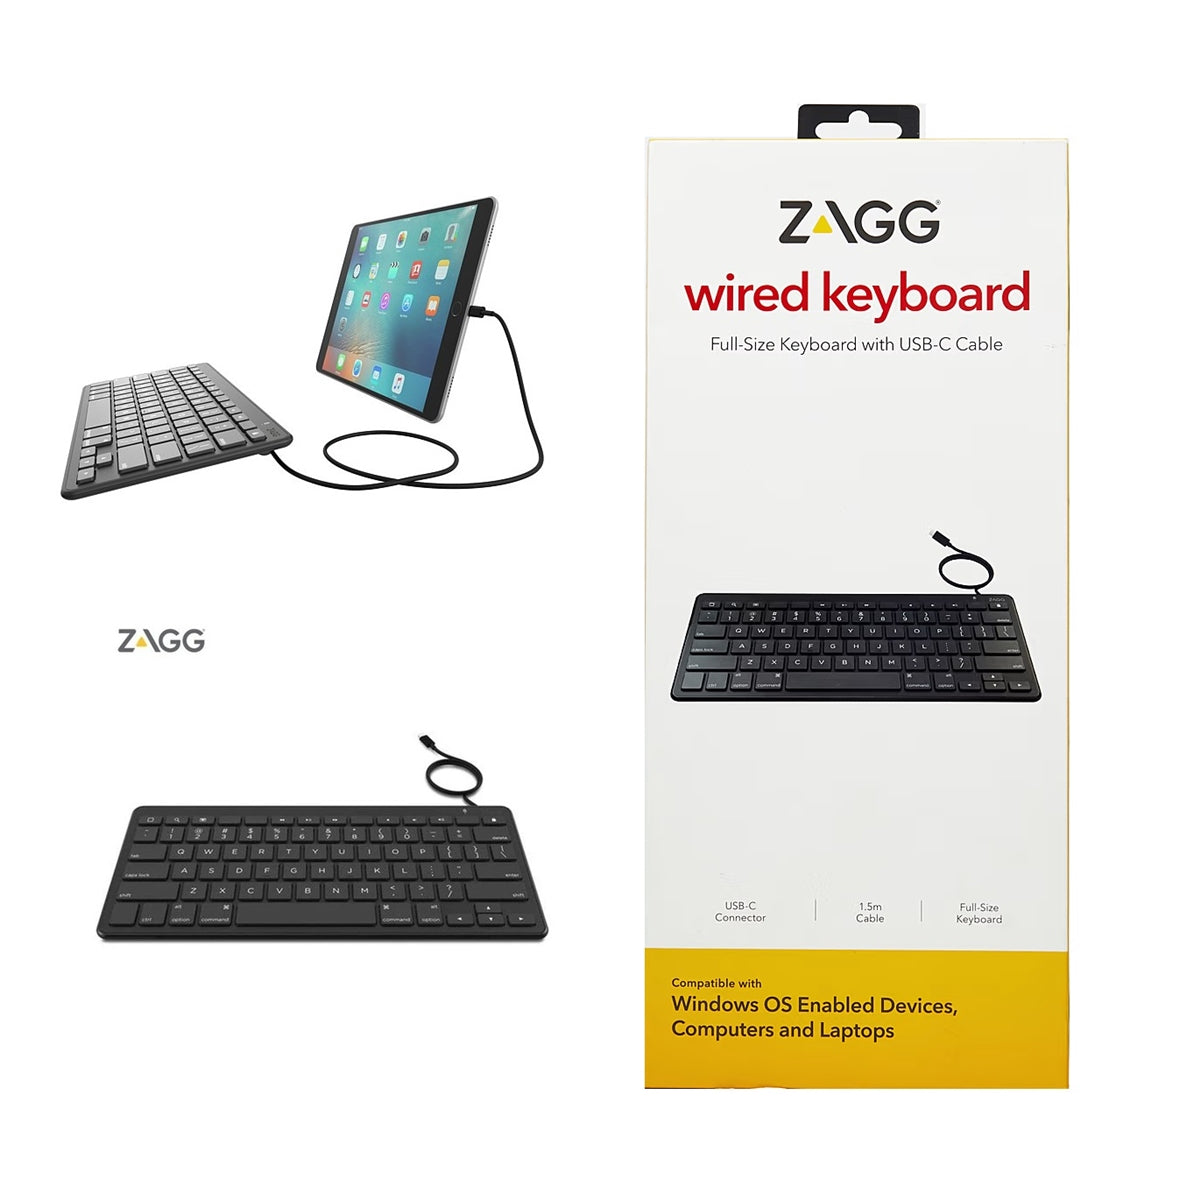 ZAGG Wired Keyboard Type-C Connector for Android